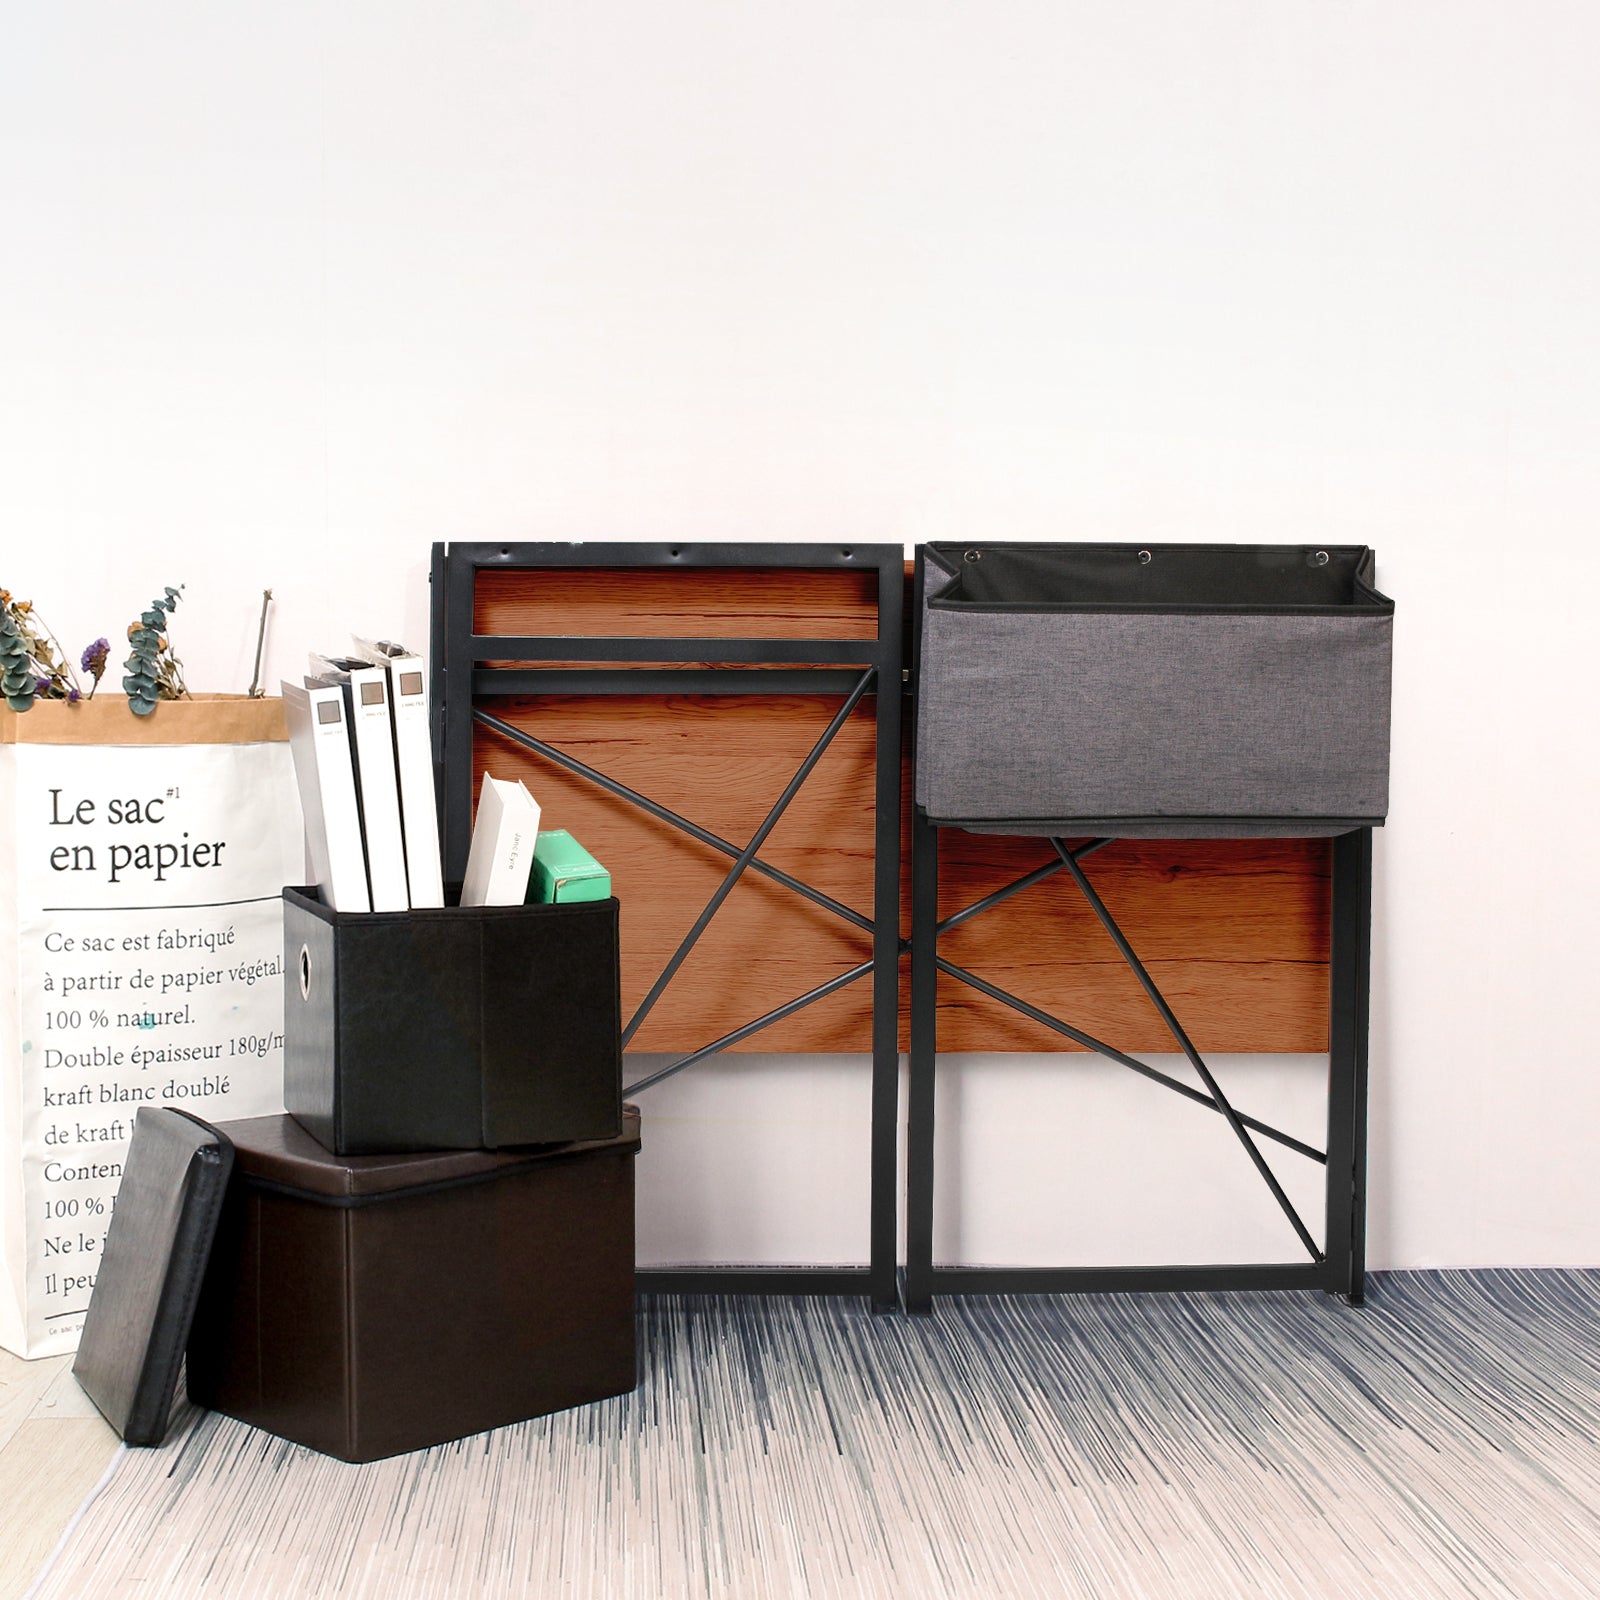 Todeco-Computer-Desk-Office-Table-with-Storage-Pouch-Foldable-Computer-Desk-Industrial-Style-Study-Table-Desk-Workstation-Brown